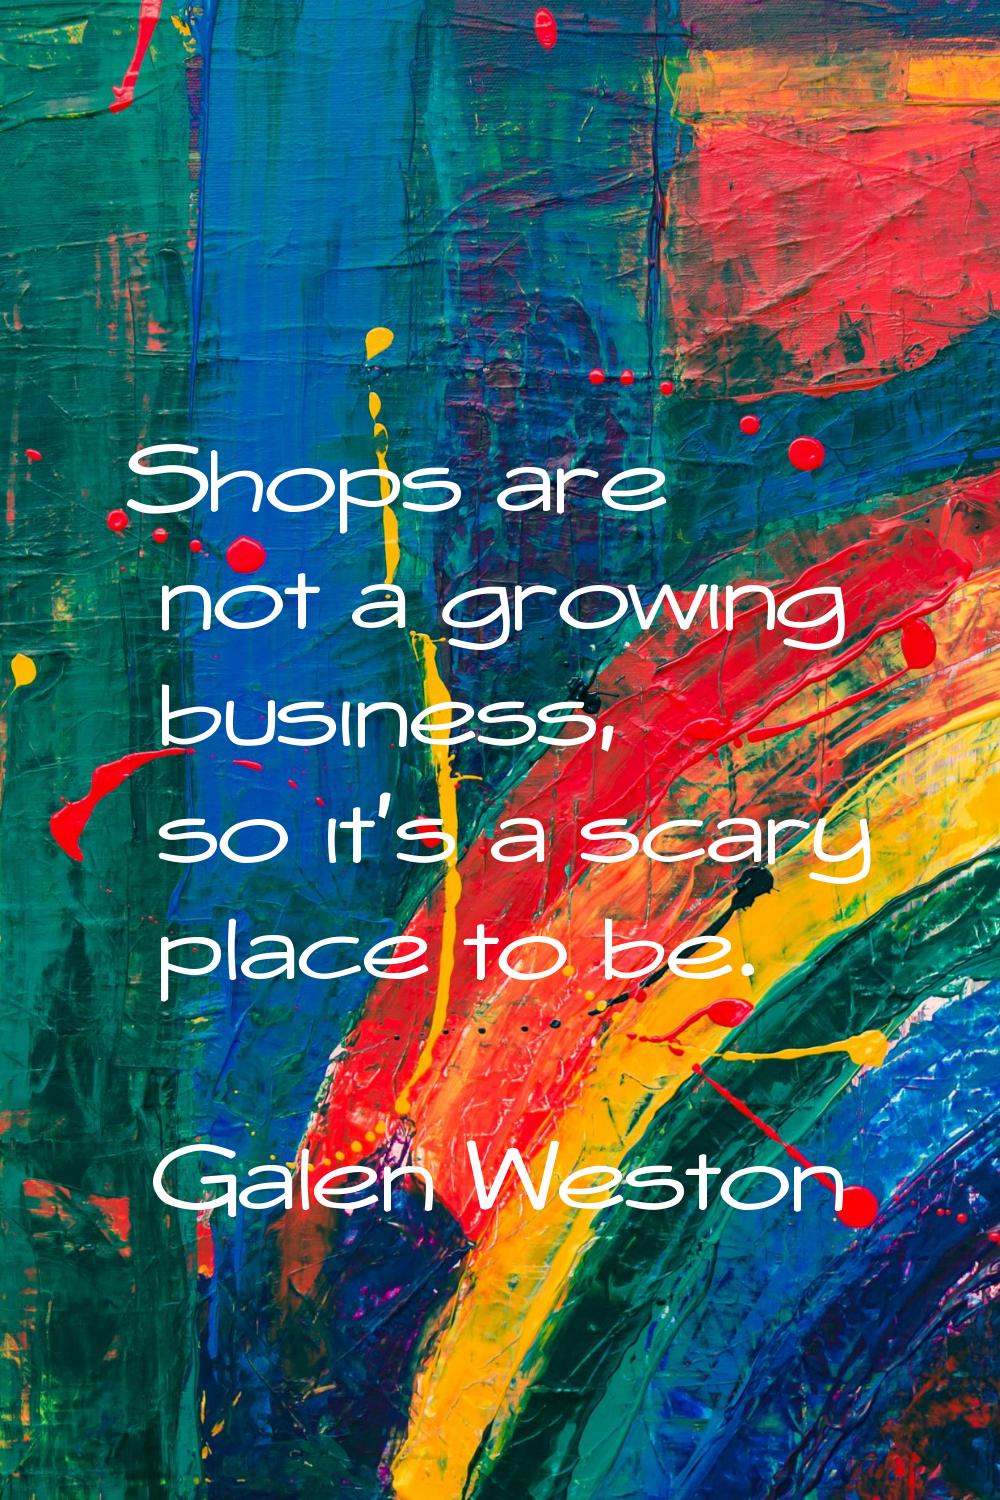 Shops are not a growing business, so it's a scary place to be.